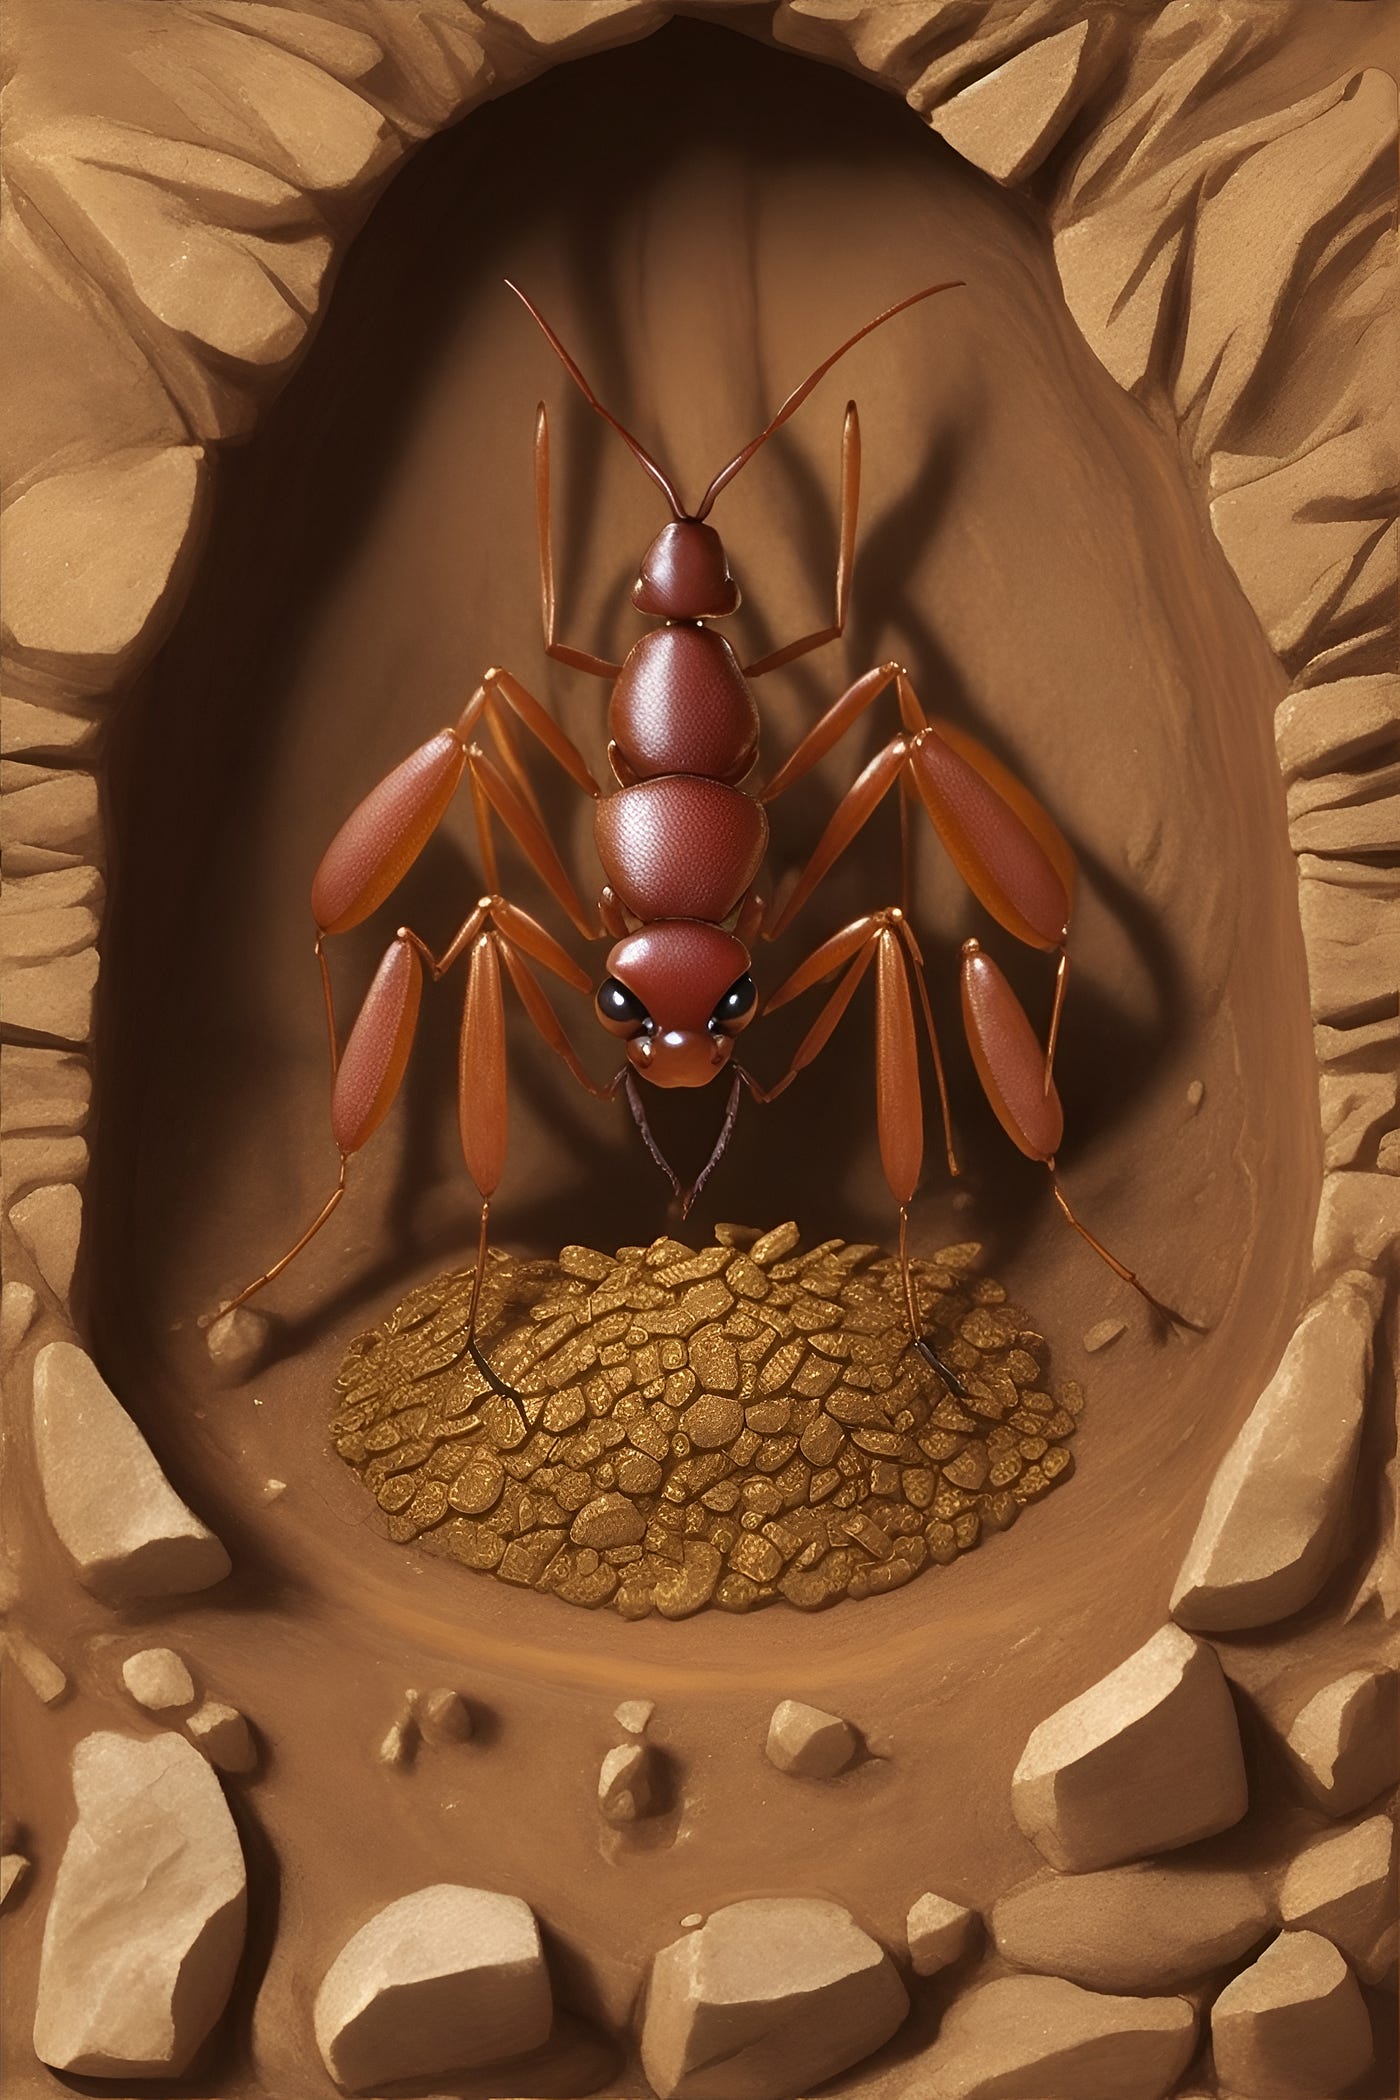 Mythic Bestiary - Indian Gold-digging Ant by Boverisuchus on